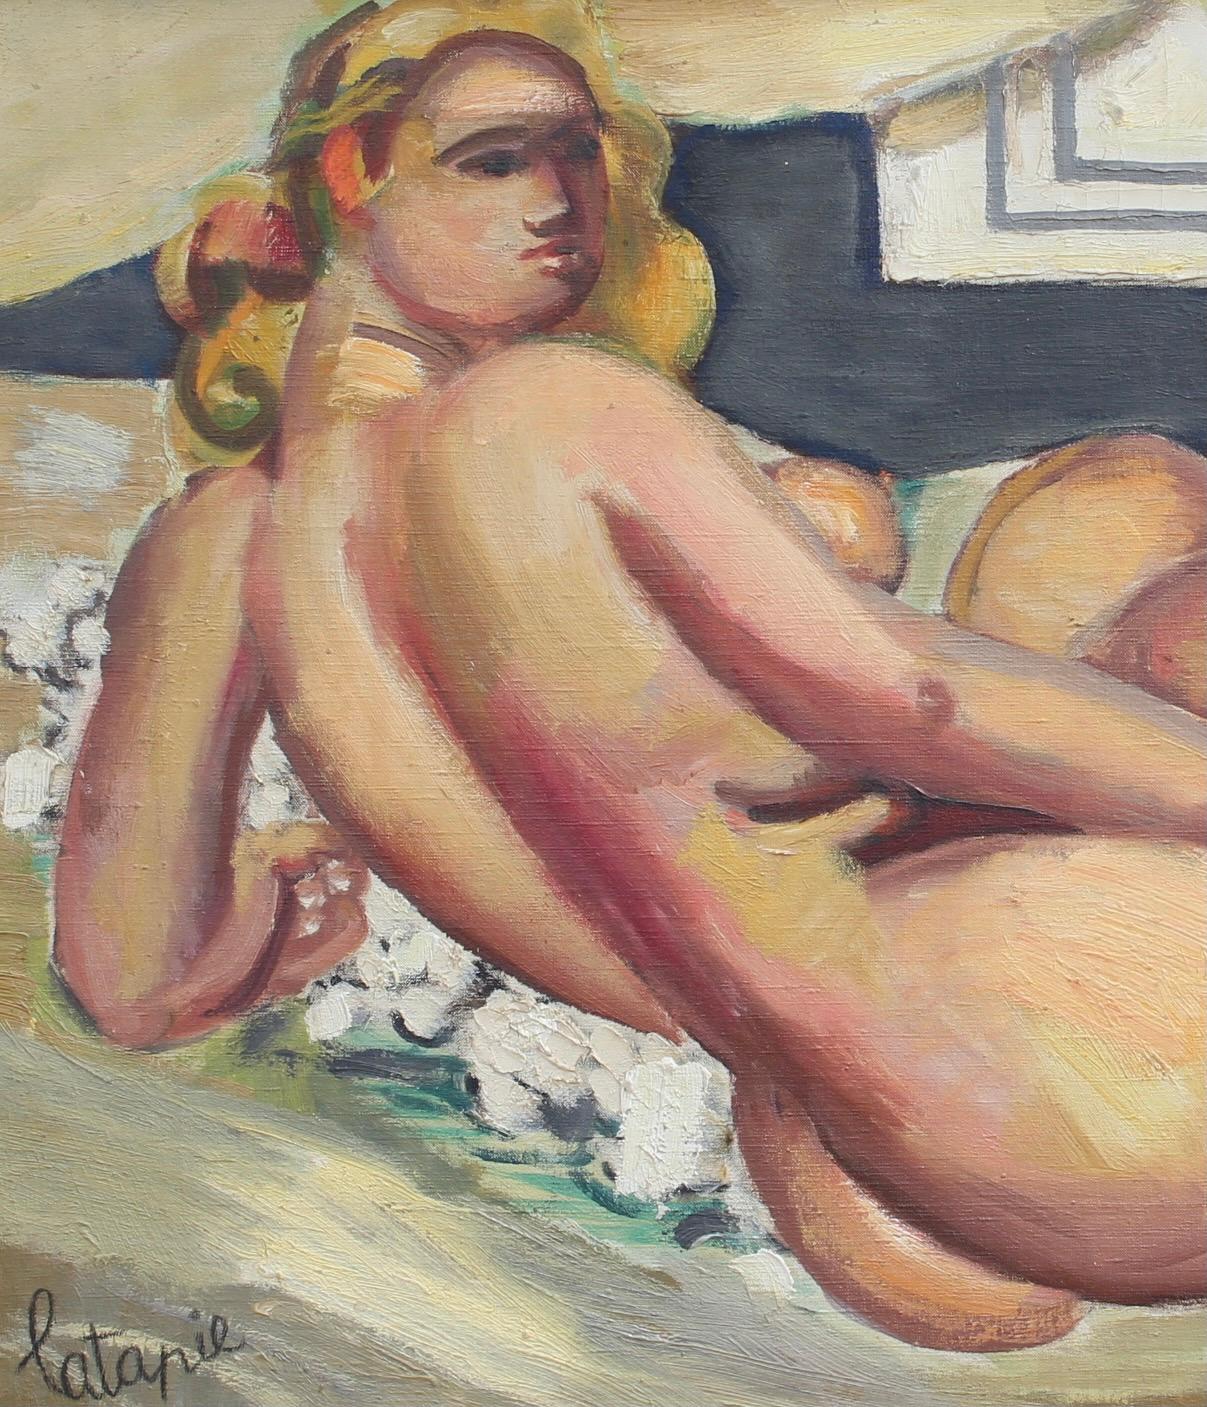 'Nude Posing on the Sofa', oil on canvas, by Louis Latapie (circa 1940s). From a long line of renowned paintings whose subject is reclining nudes, this extraordinarily desirable work by French artist Latapie is seductive and alluring.